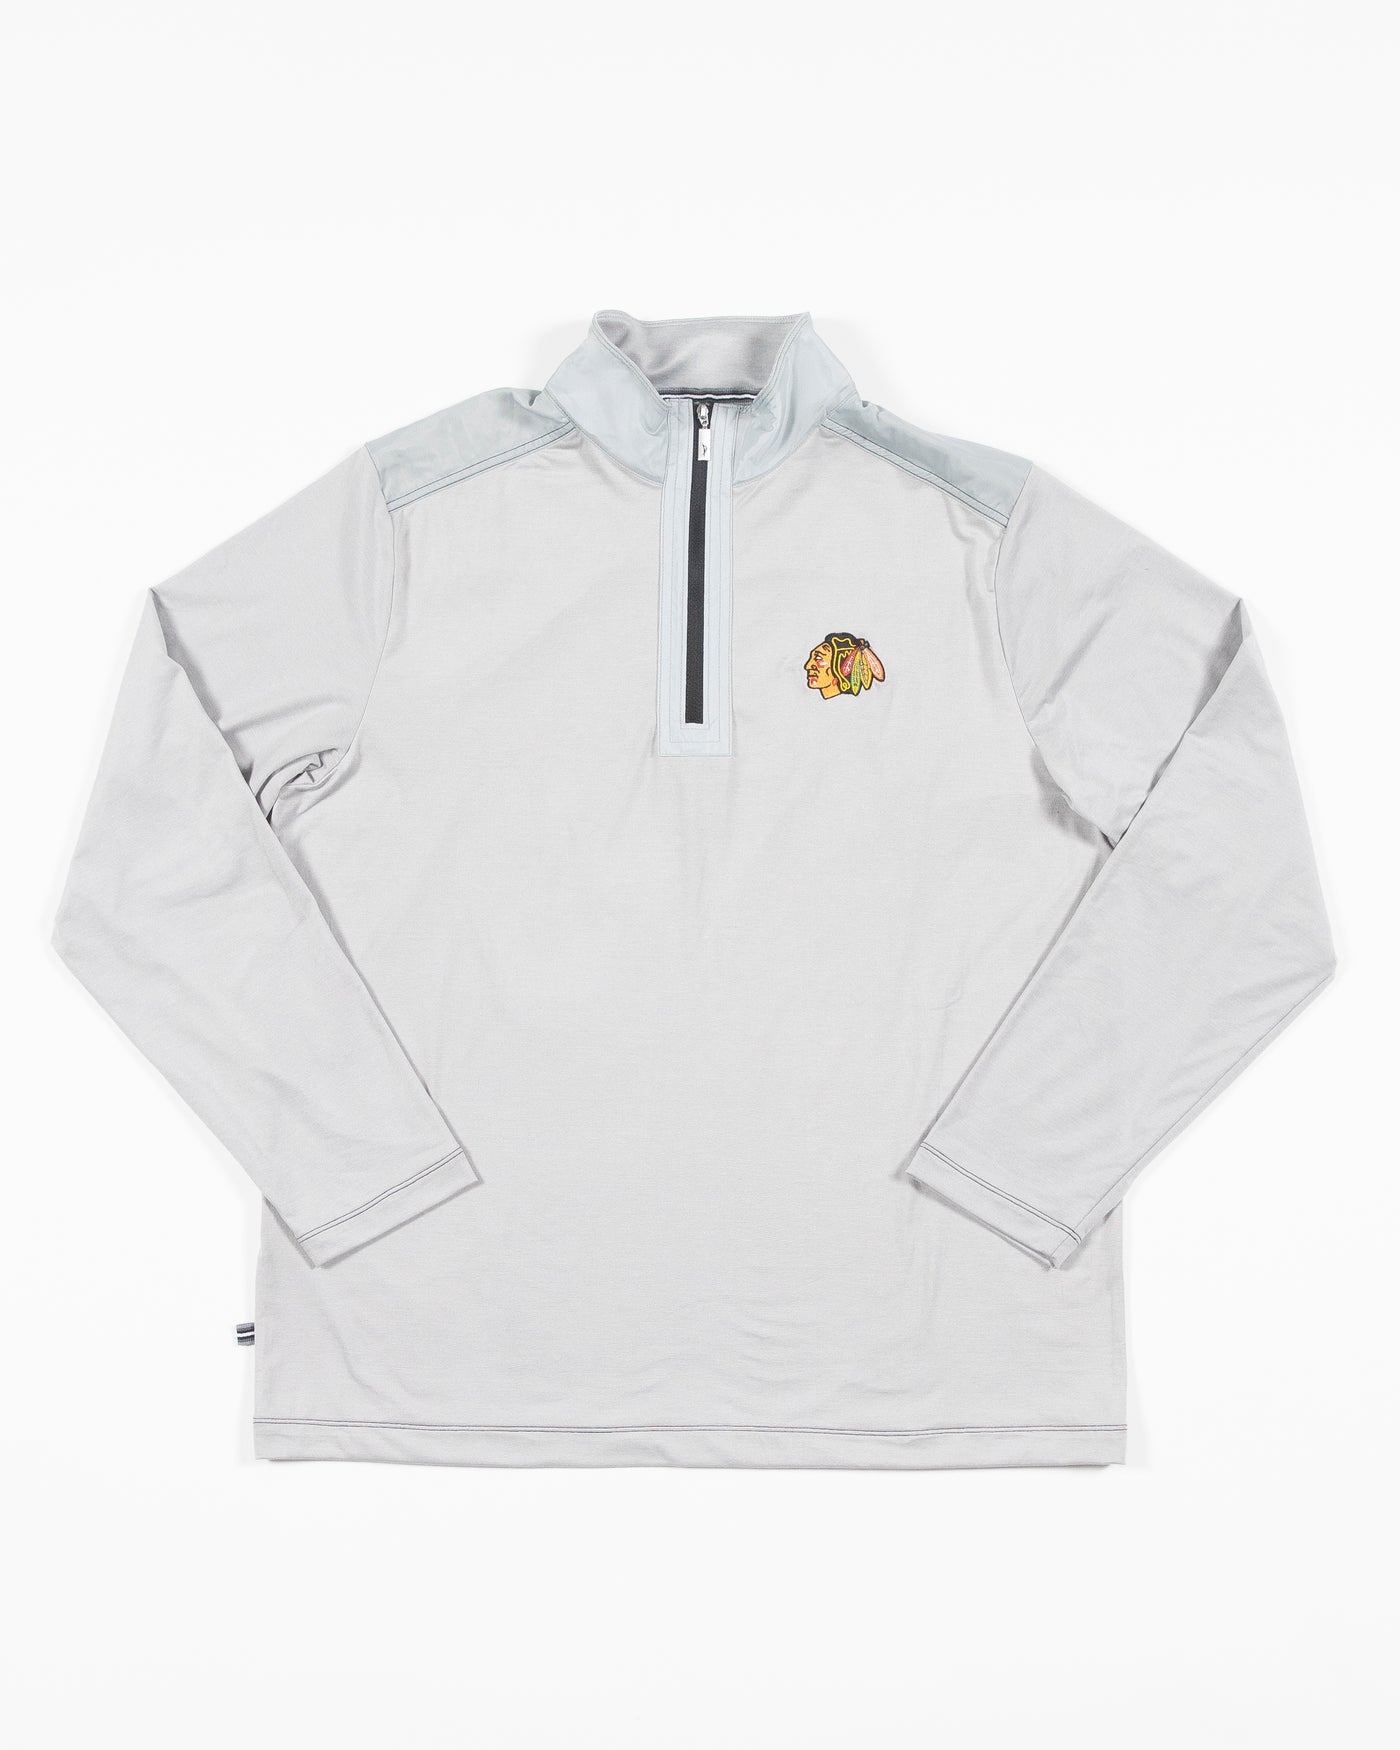 grey Tommy Bahama half zip jacket with Chicago Blackhawks primary logo embroidered on left chest - front lay flat